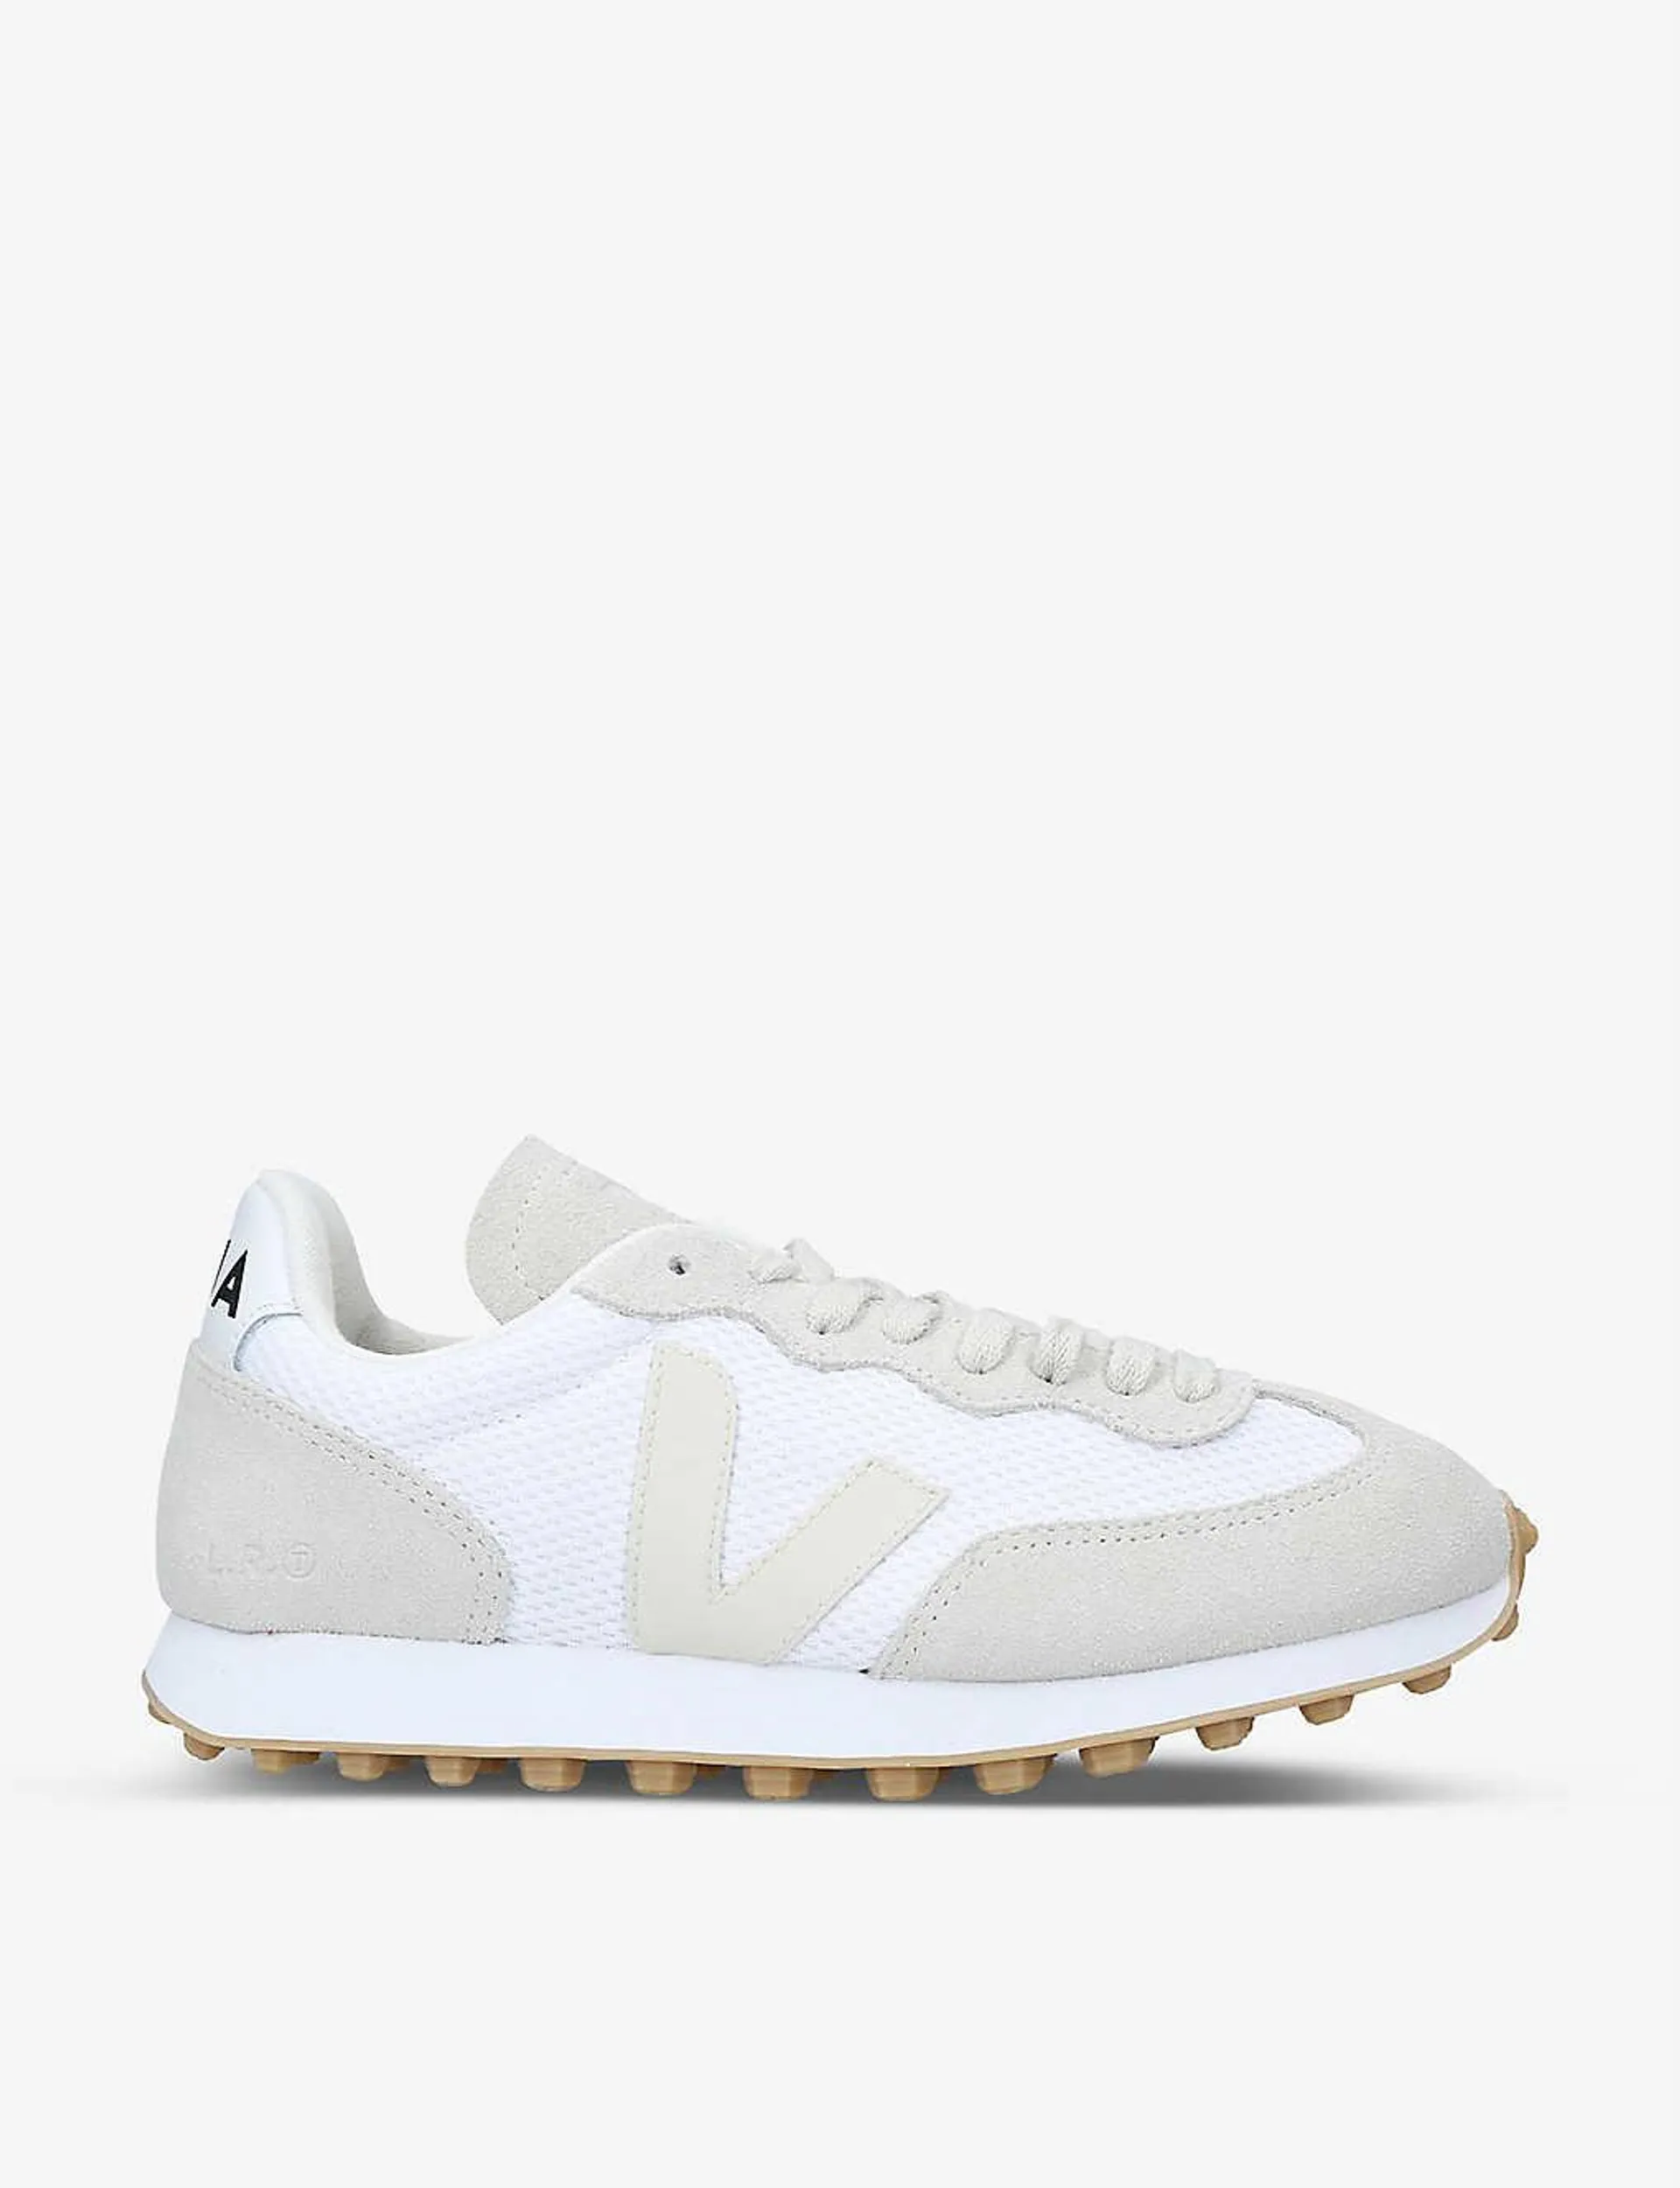 Women's Rio Branco mesh and leather trainers